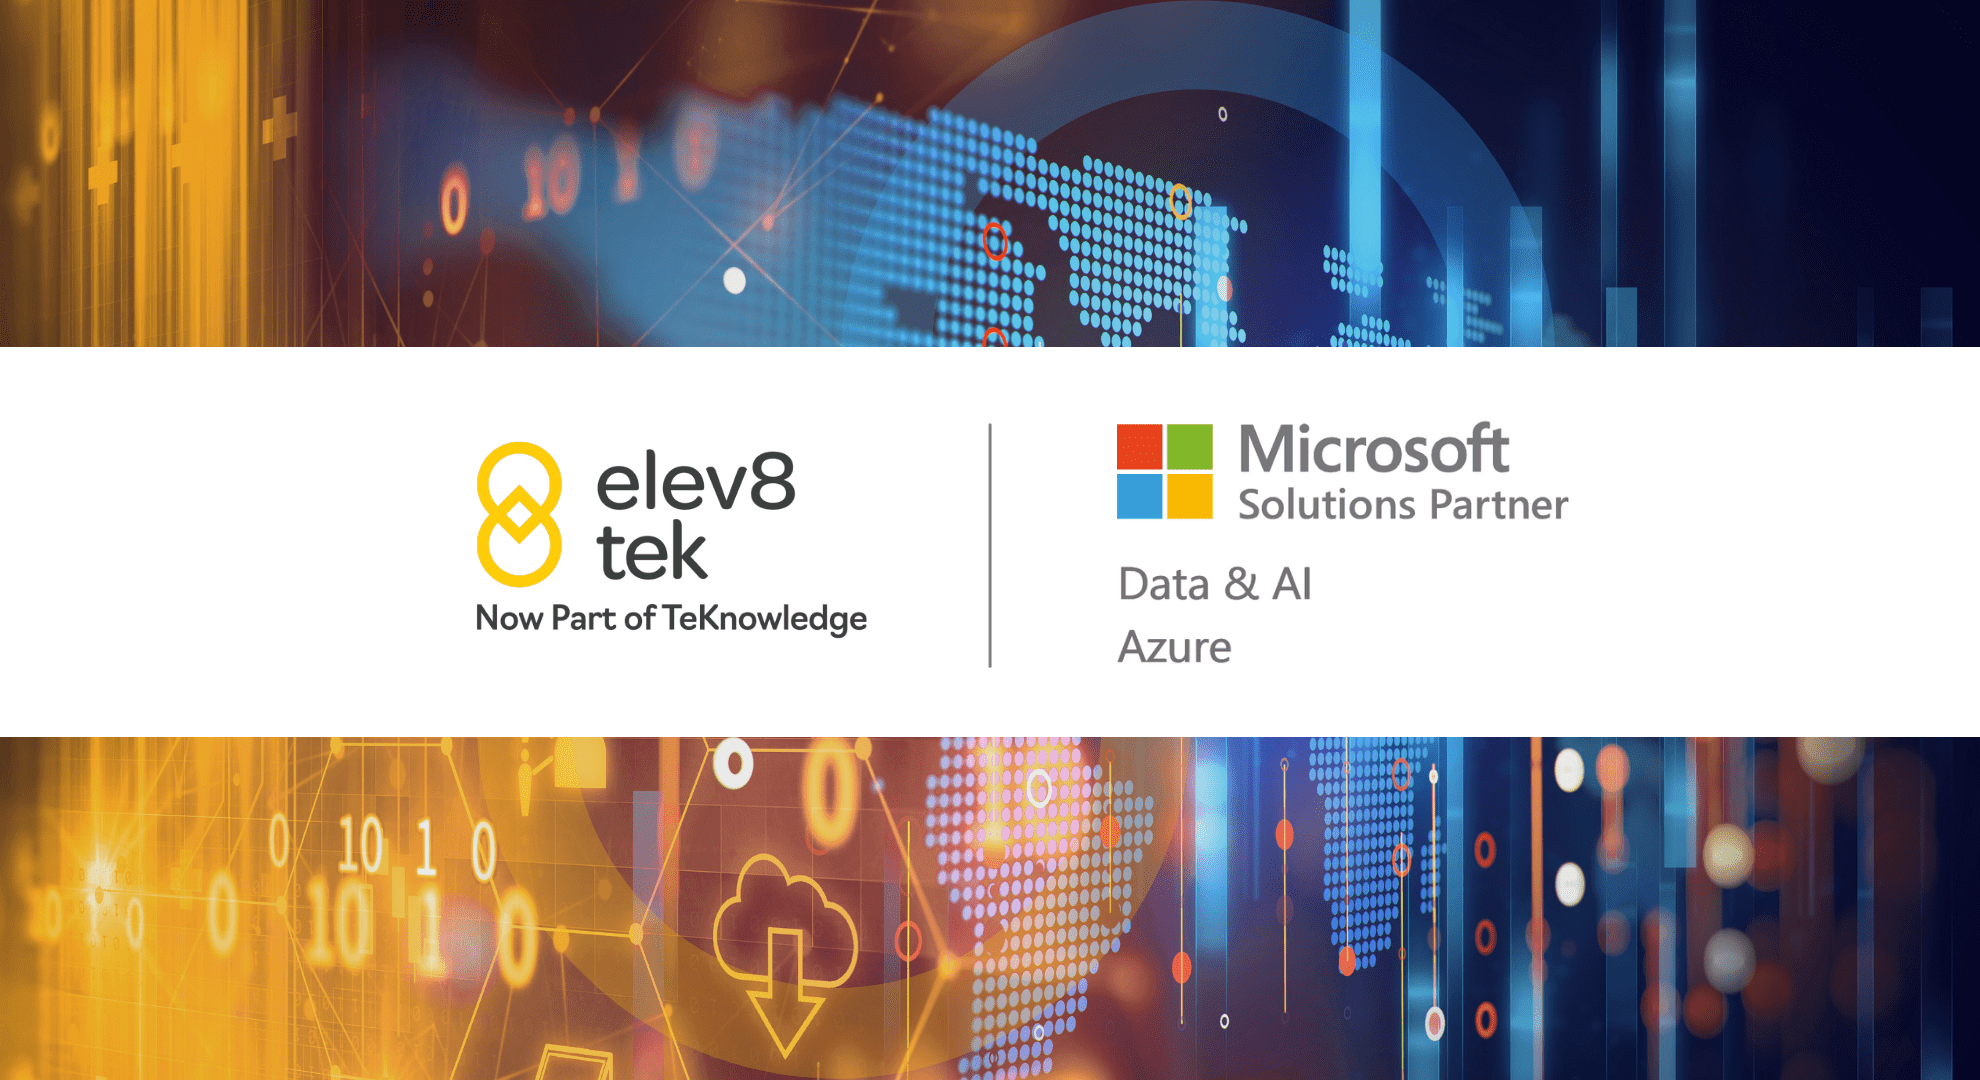 Featured image for article titled "Elev8 Tek Becomes Microsoft Solutions Partner for Data & AI" showing Elev8 Tek's logo next to Microsoft's logo.